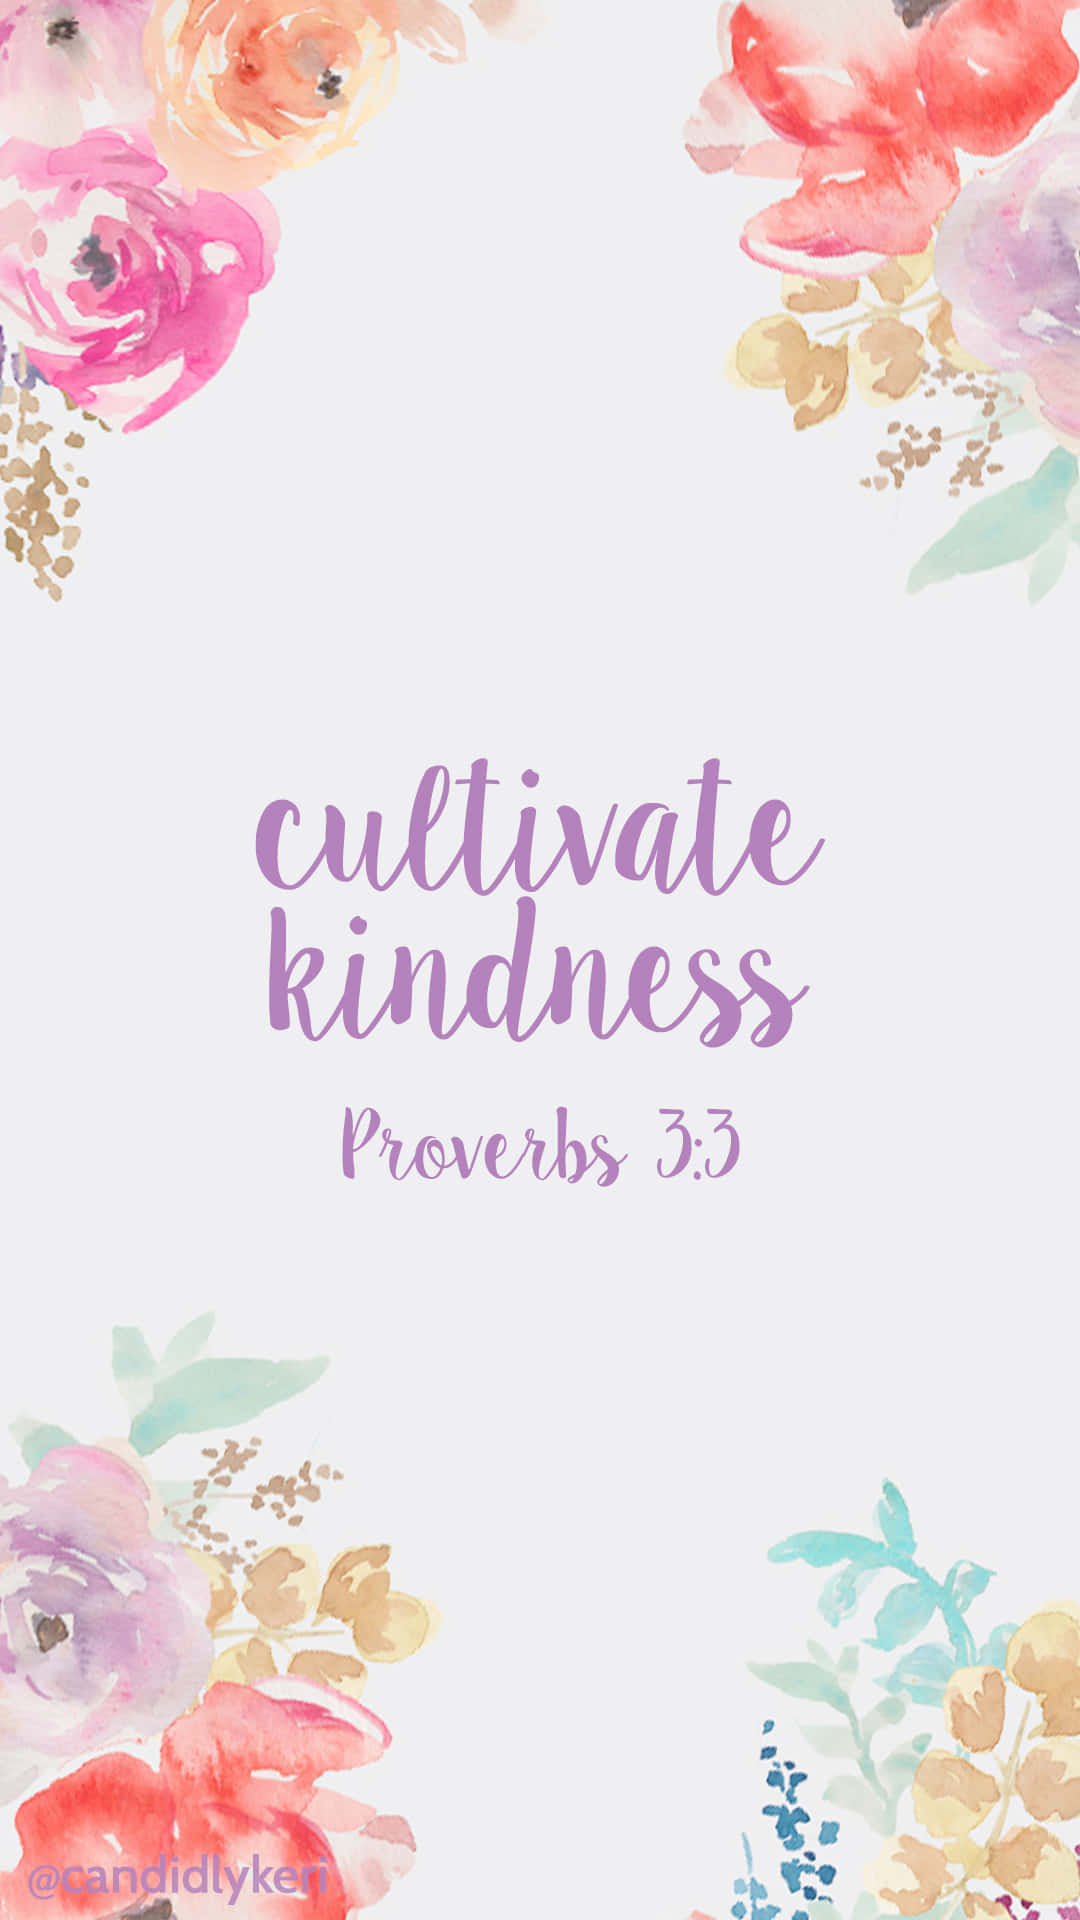 Girly Bible Verse With Kindness Wallpaper